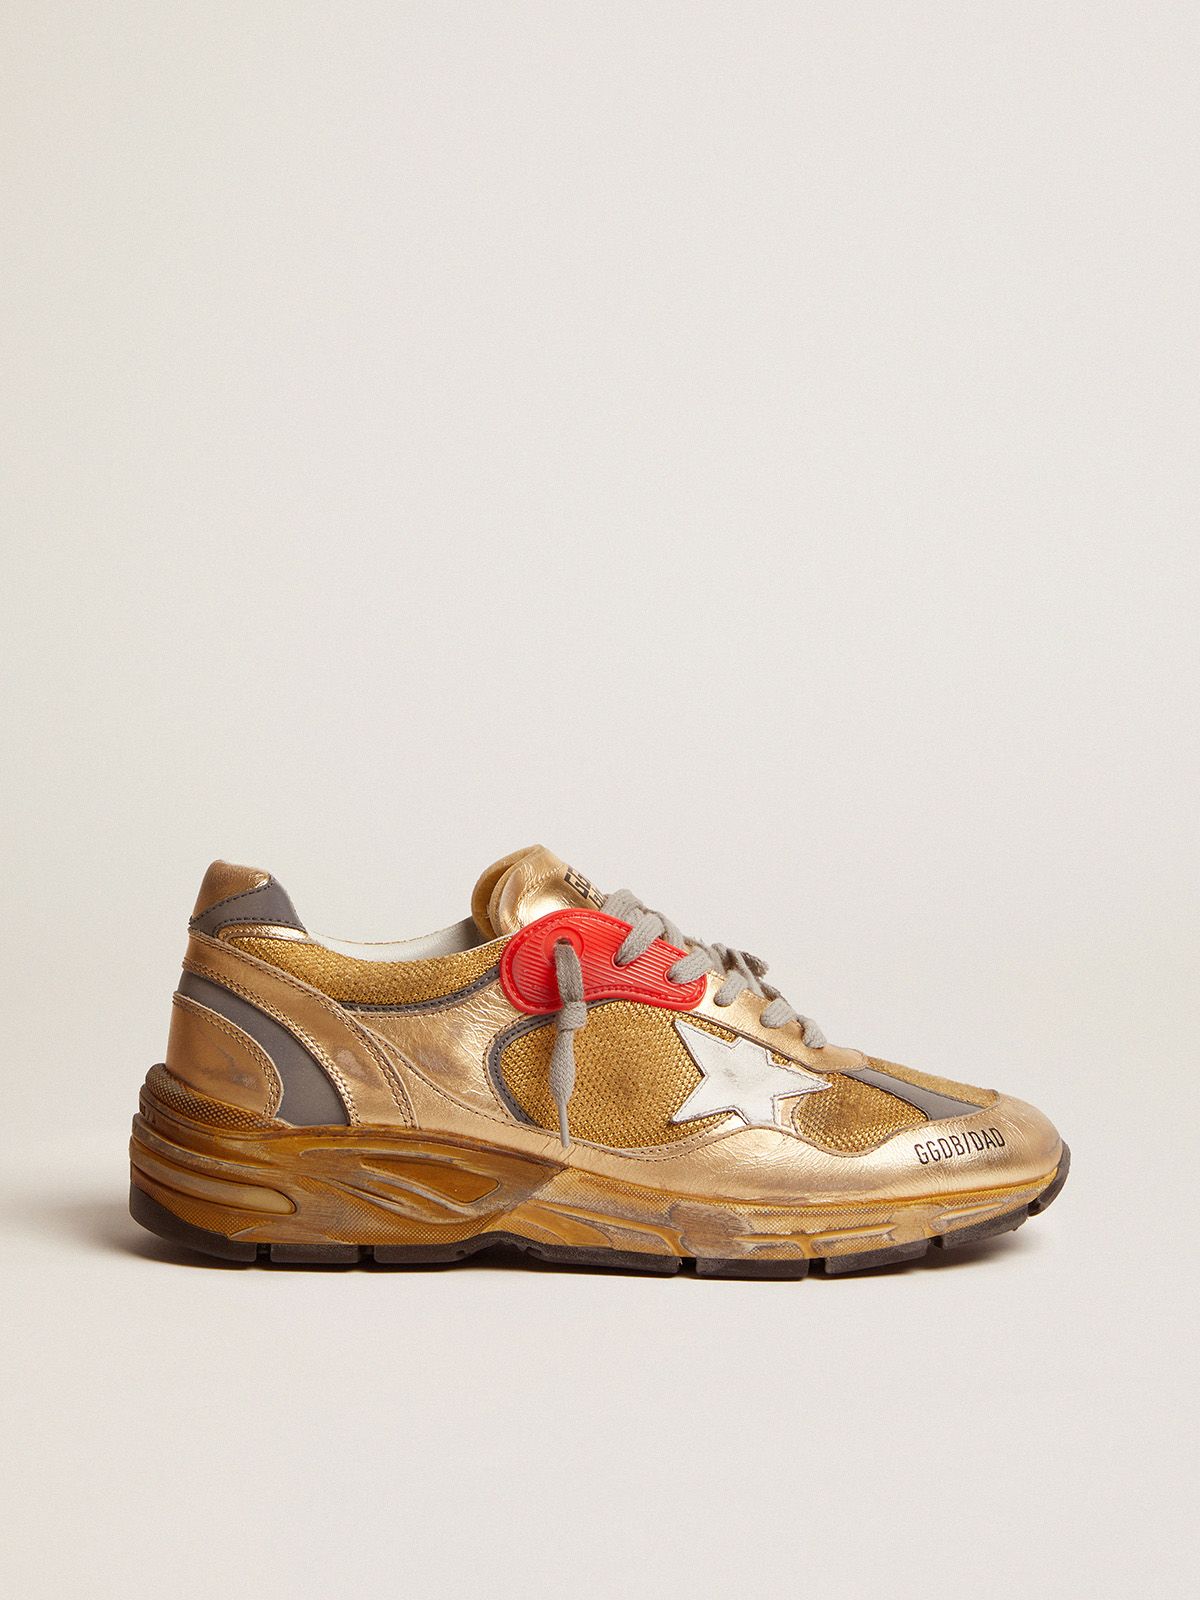 golden goose Gold sneakers finish with Dad-Star distressed